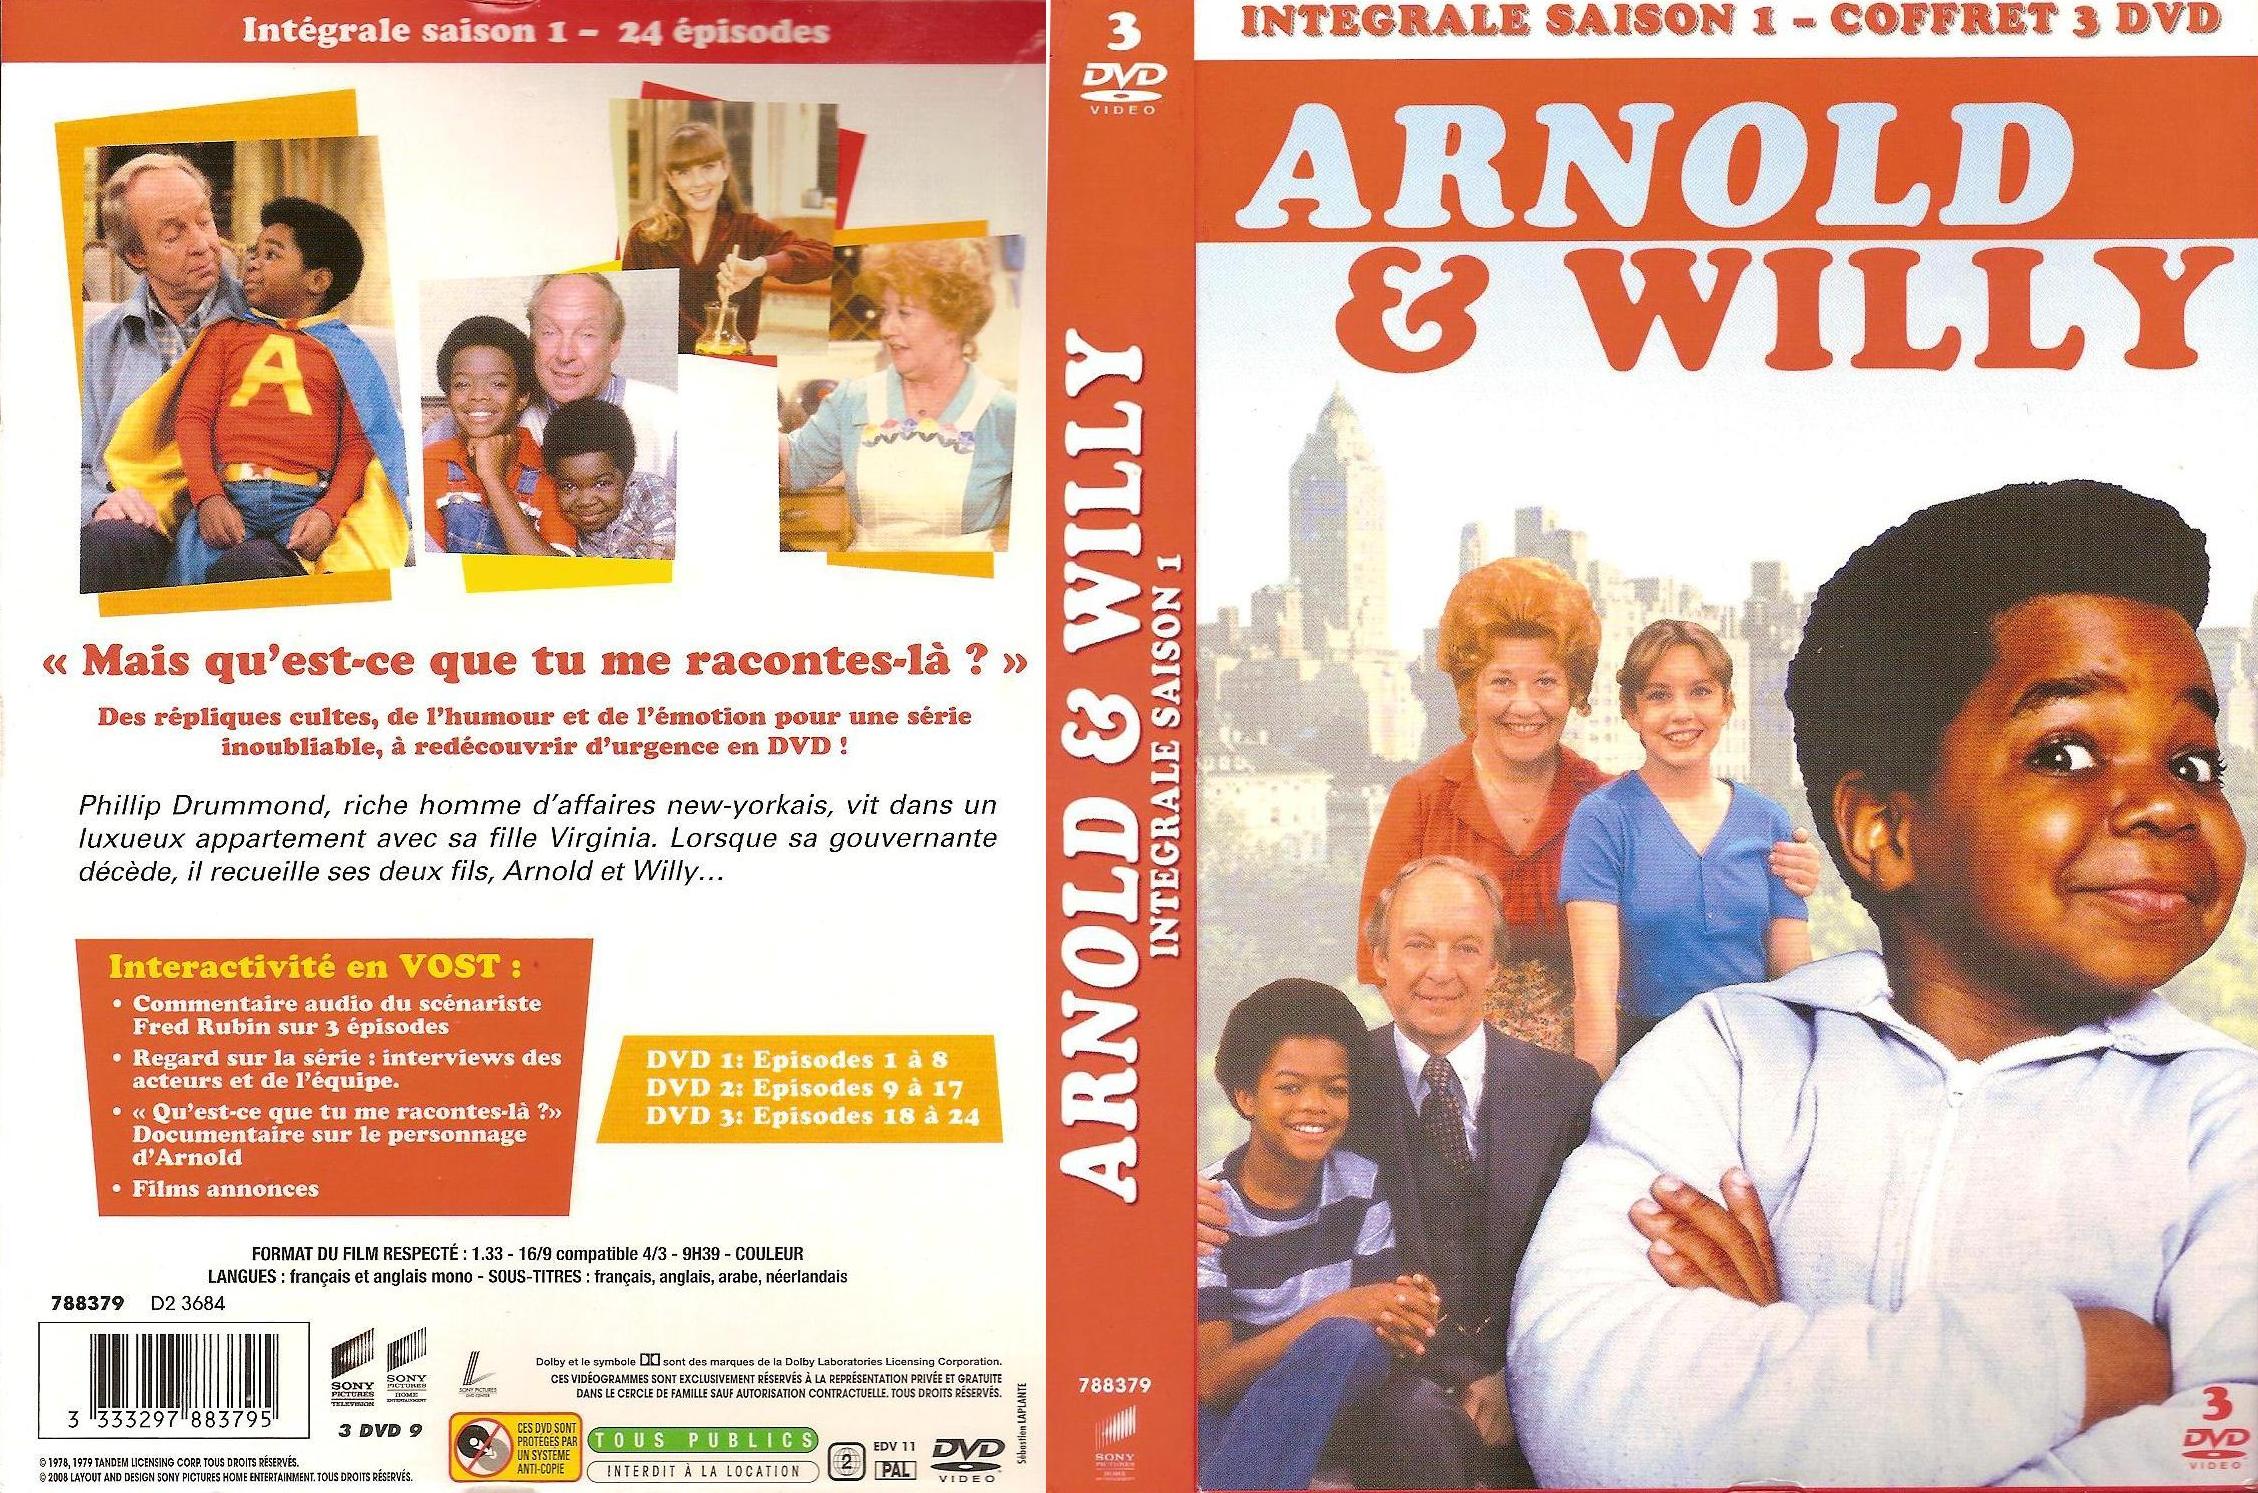 Jaquette DVD Arnold & Willy Saison 1 COFFRET